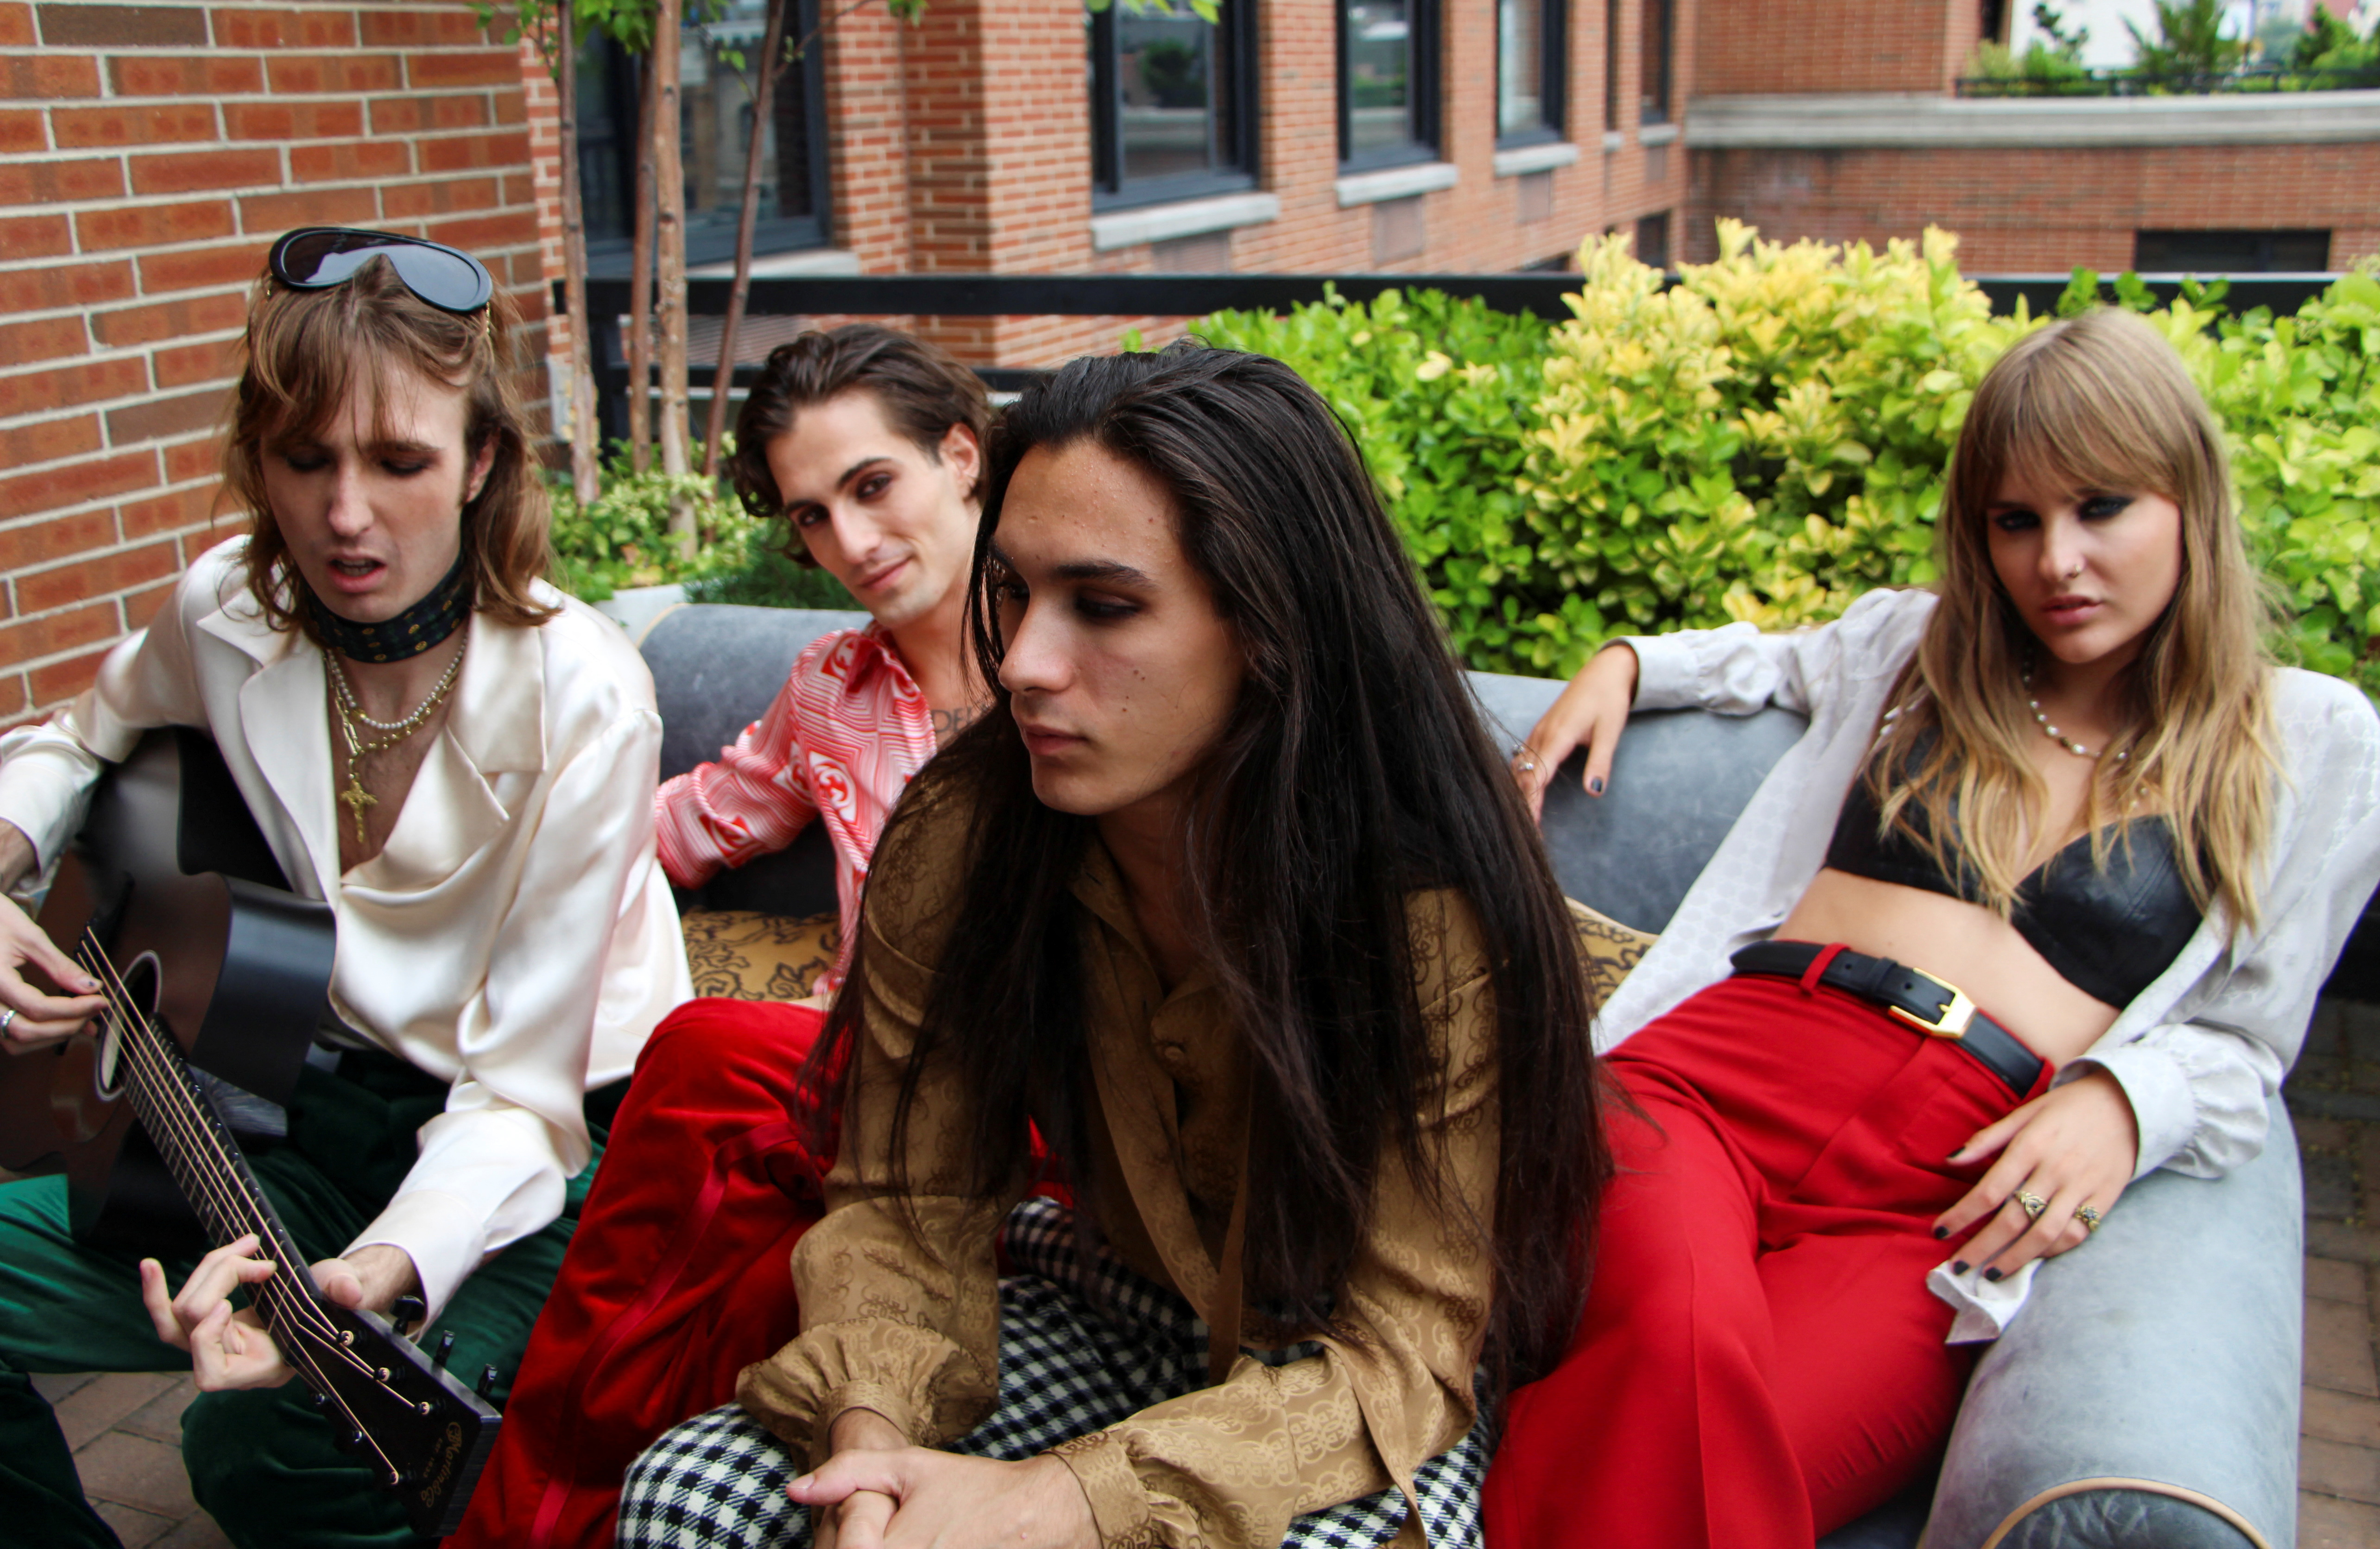 Rock band Maneskin poses for pictures in New York City